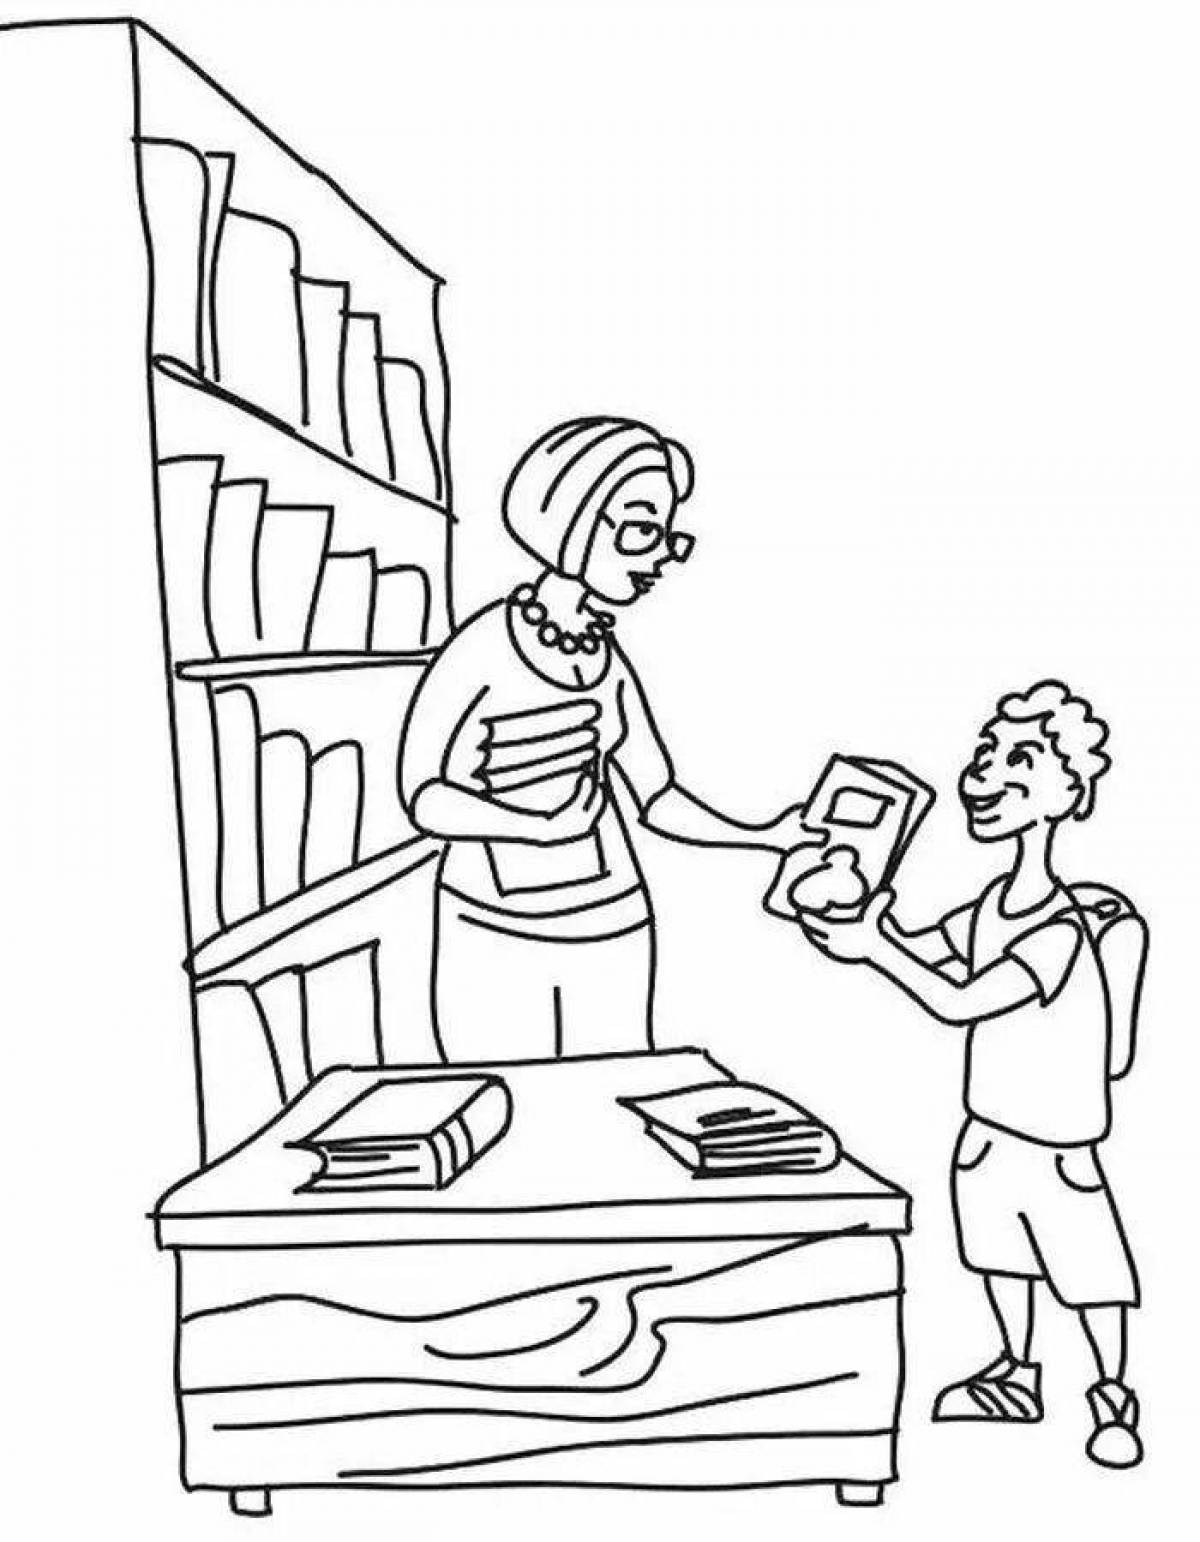 Creative library coloring page